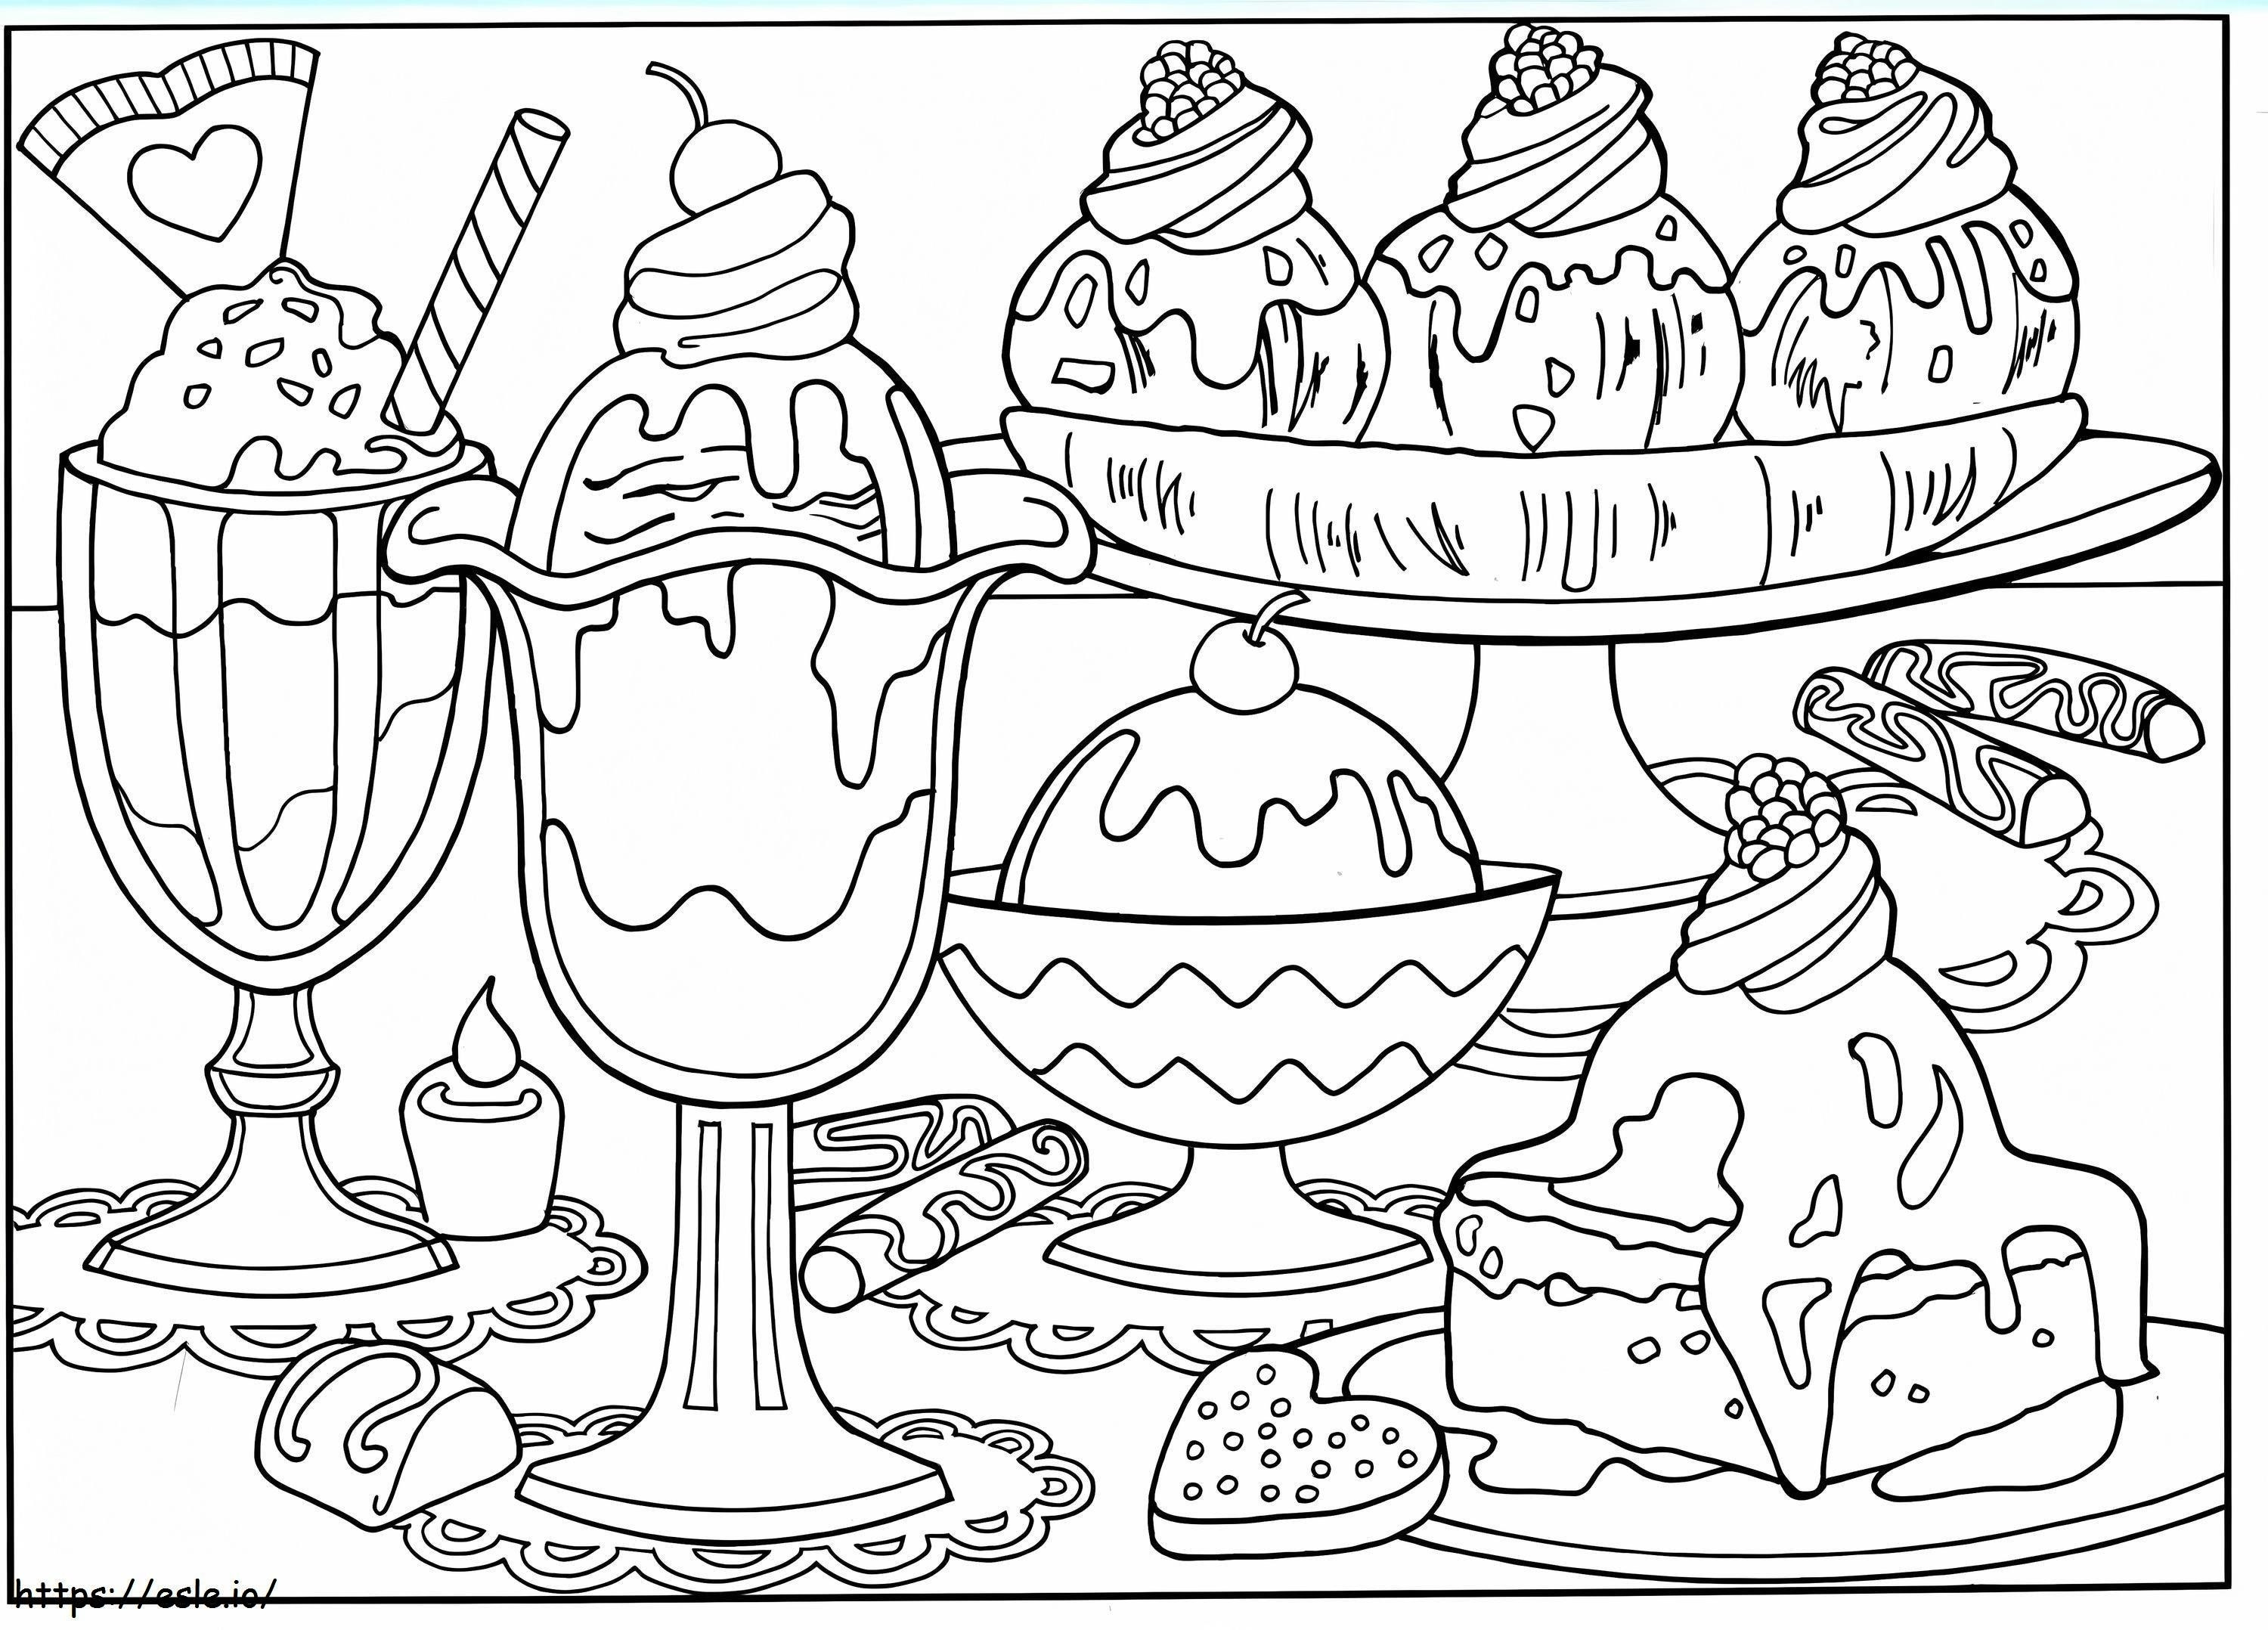 Ice Cream Table coloring page